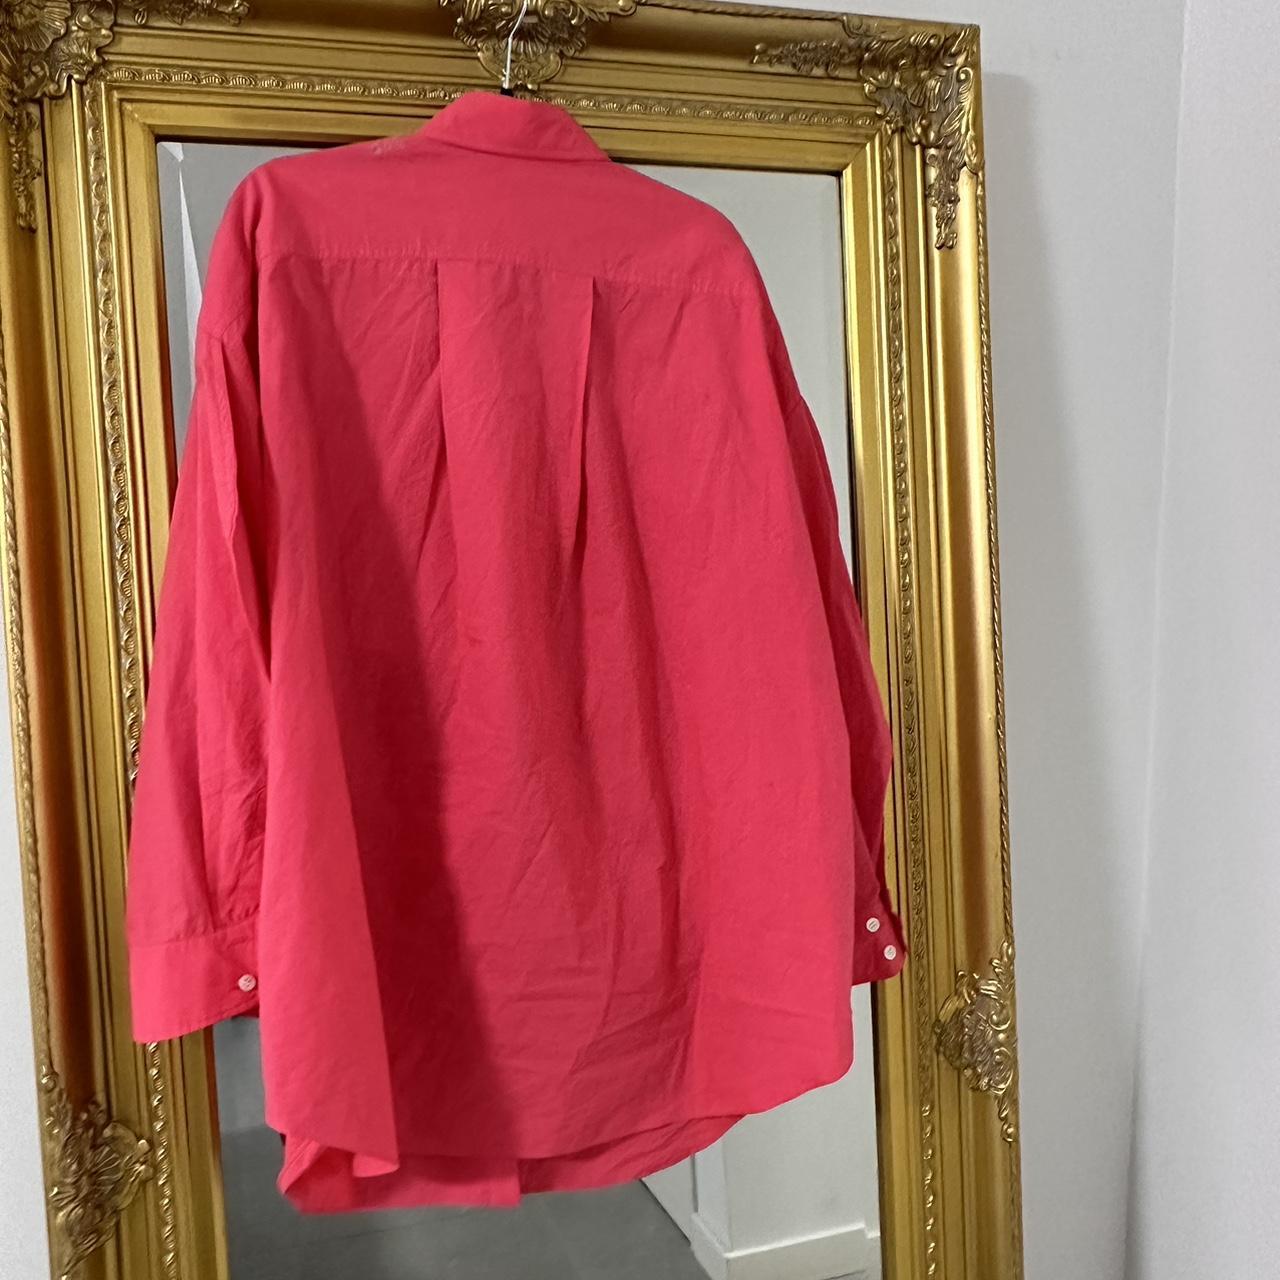 The Frankie Shop Women's Pink and Red Shirt | Depop